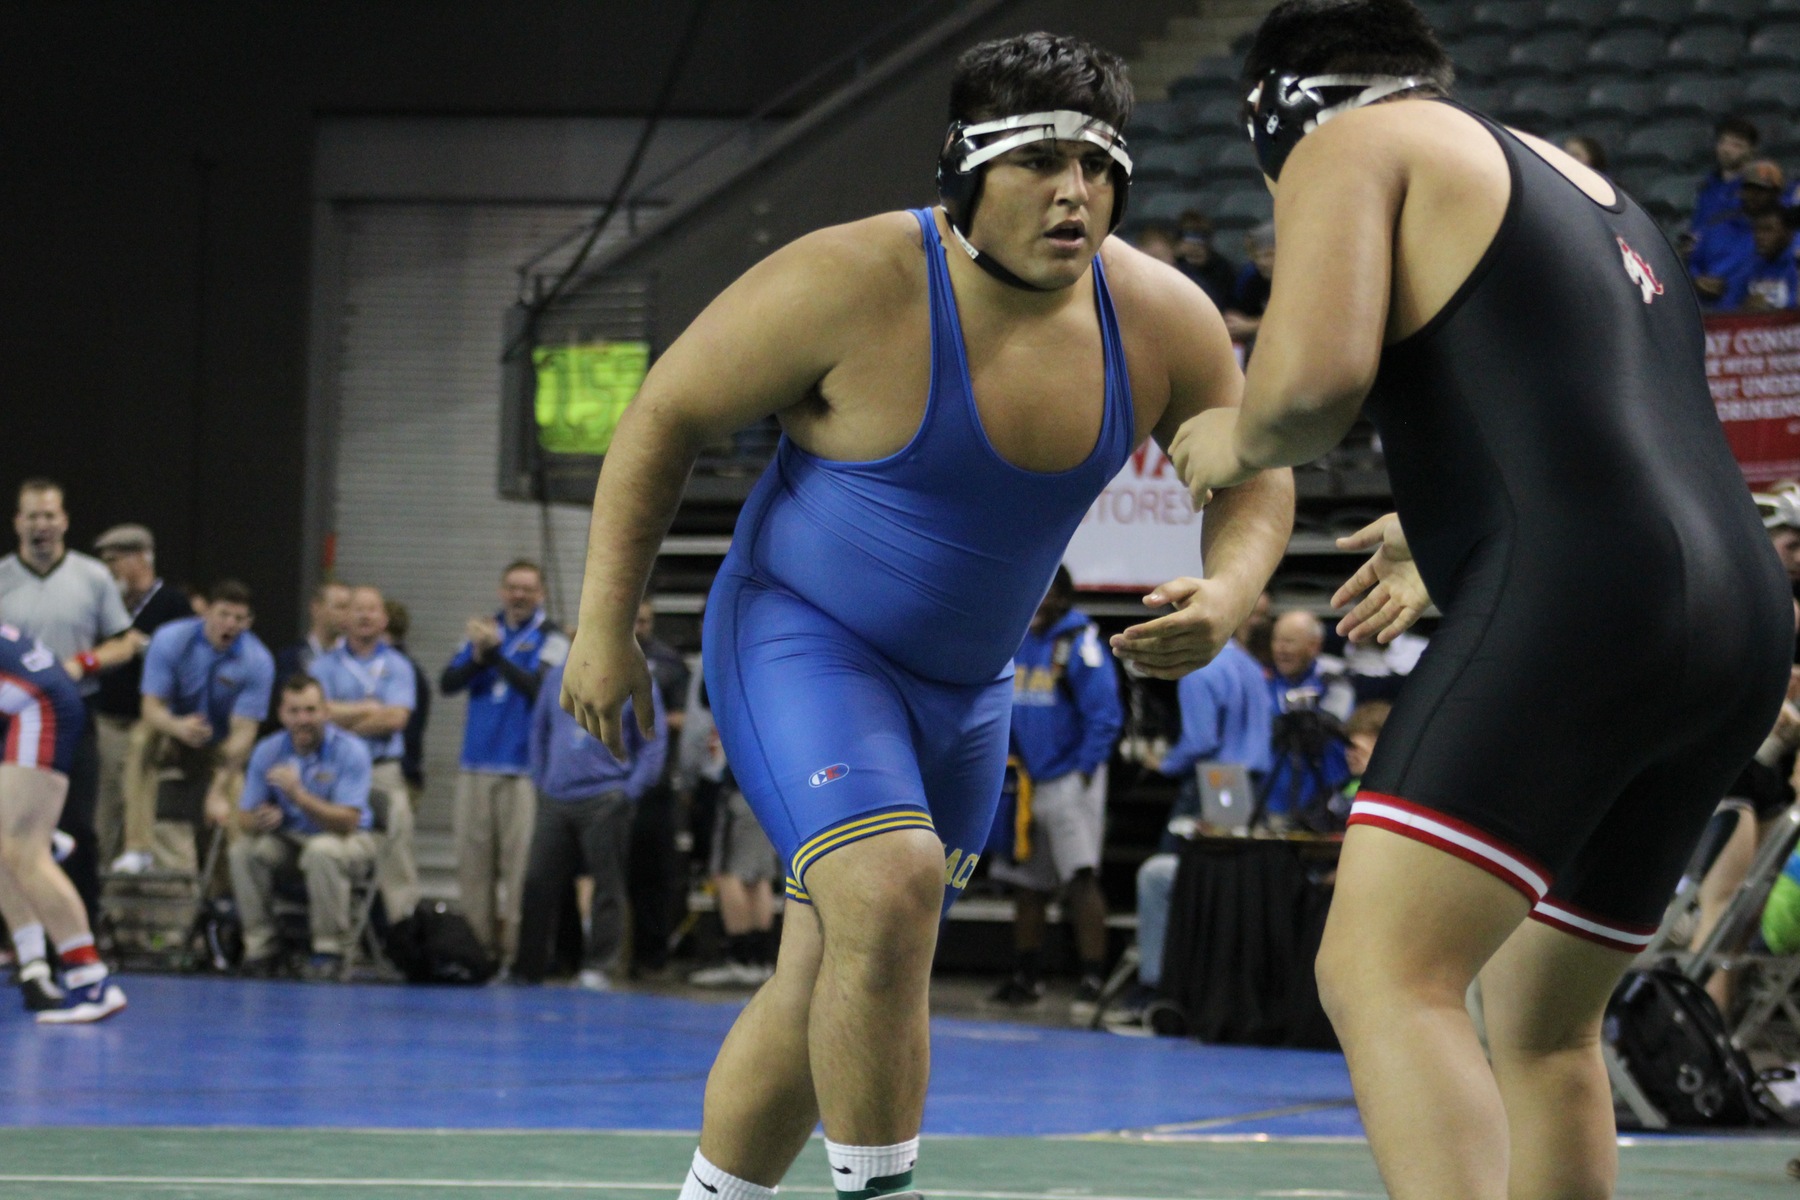 Mario Pena seeks to become NIACC's 13 individual national champion Saturday night.